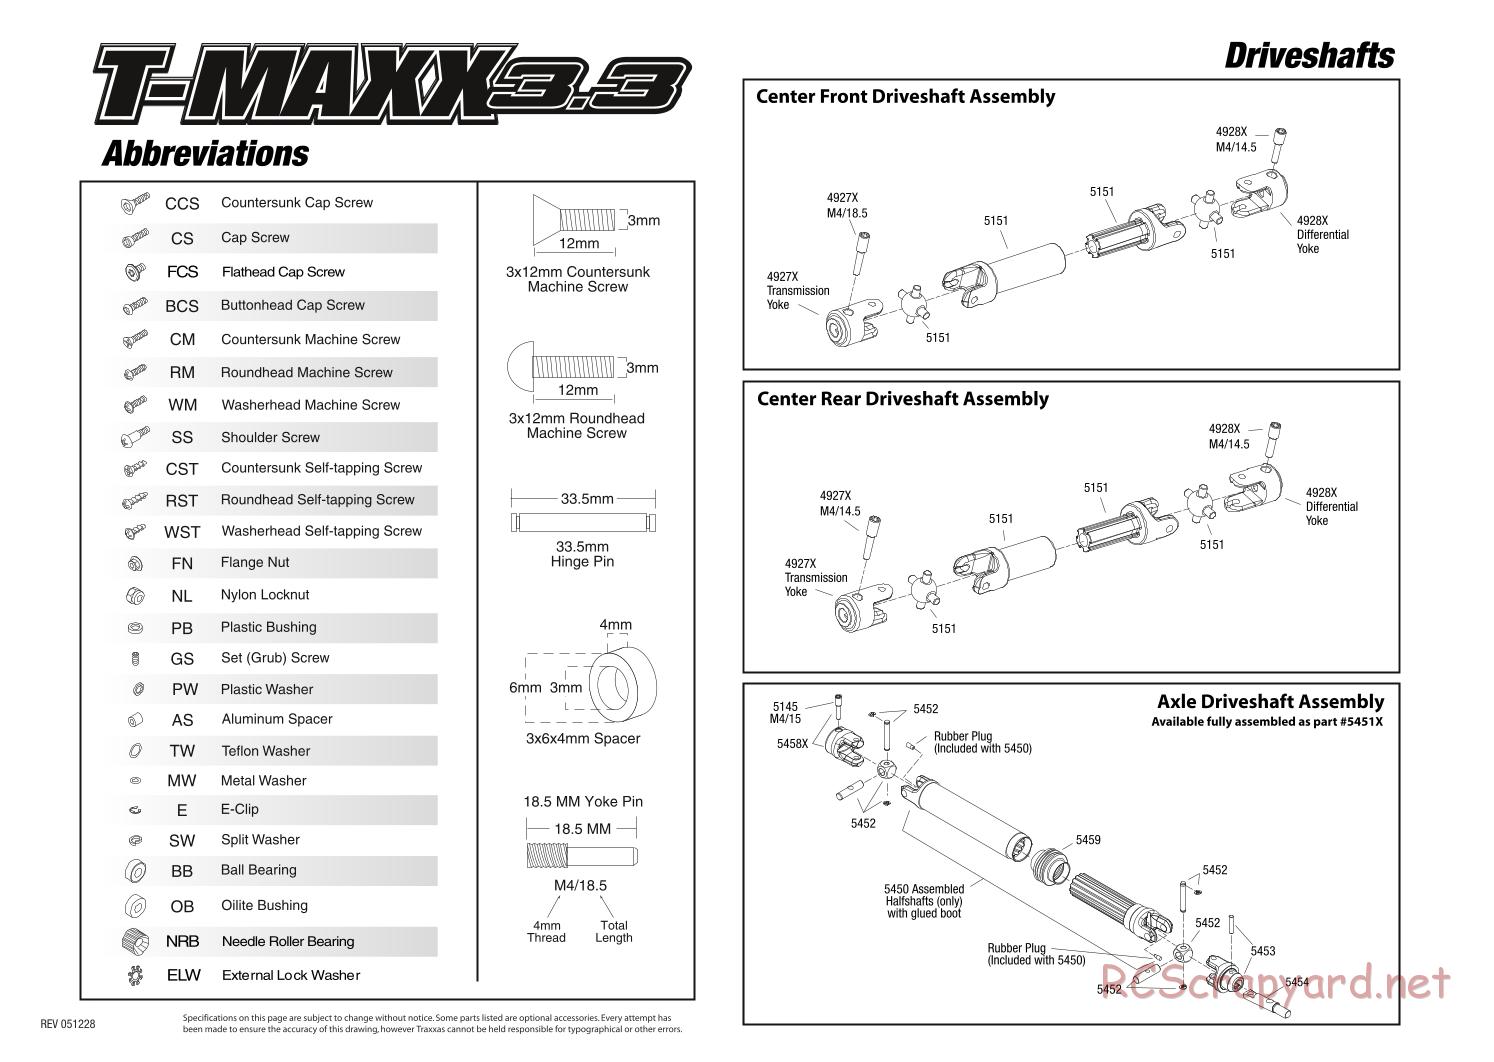 Traxxas - T-Maxx 3.3 (2006) - Exploded Views - Page 5